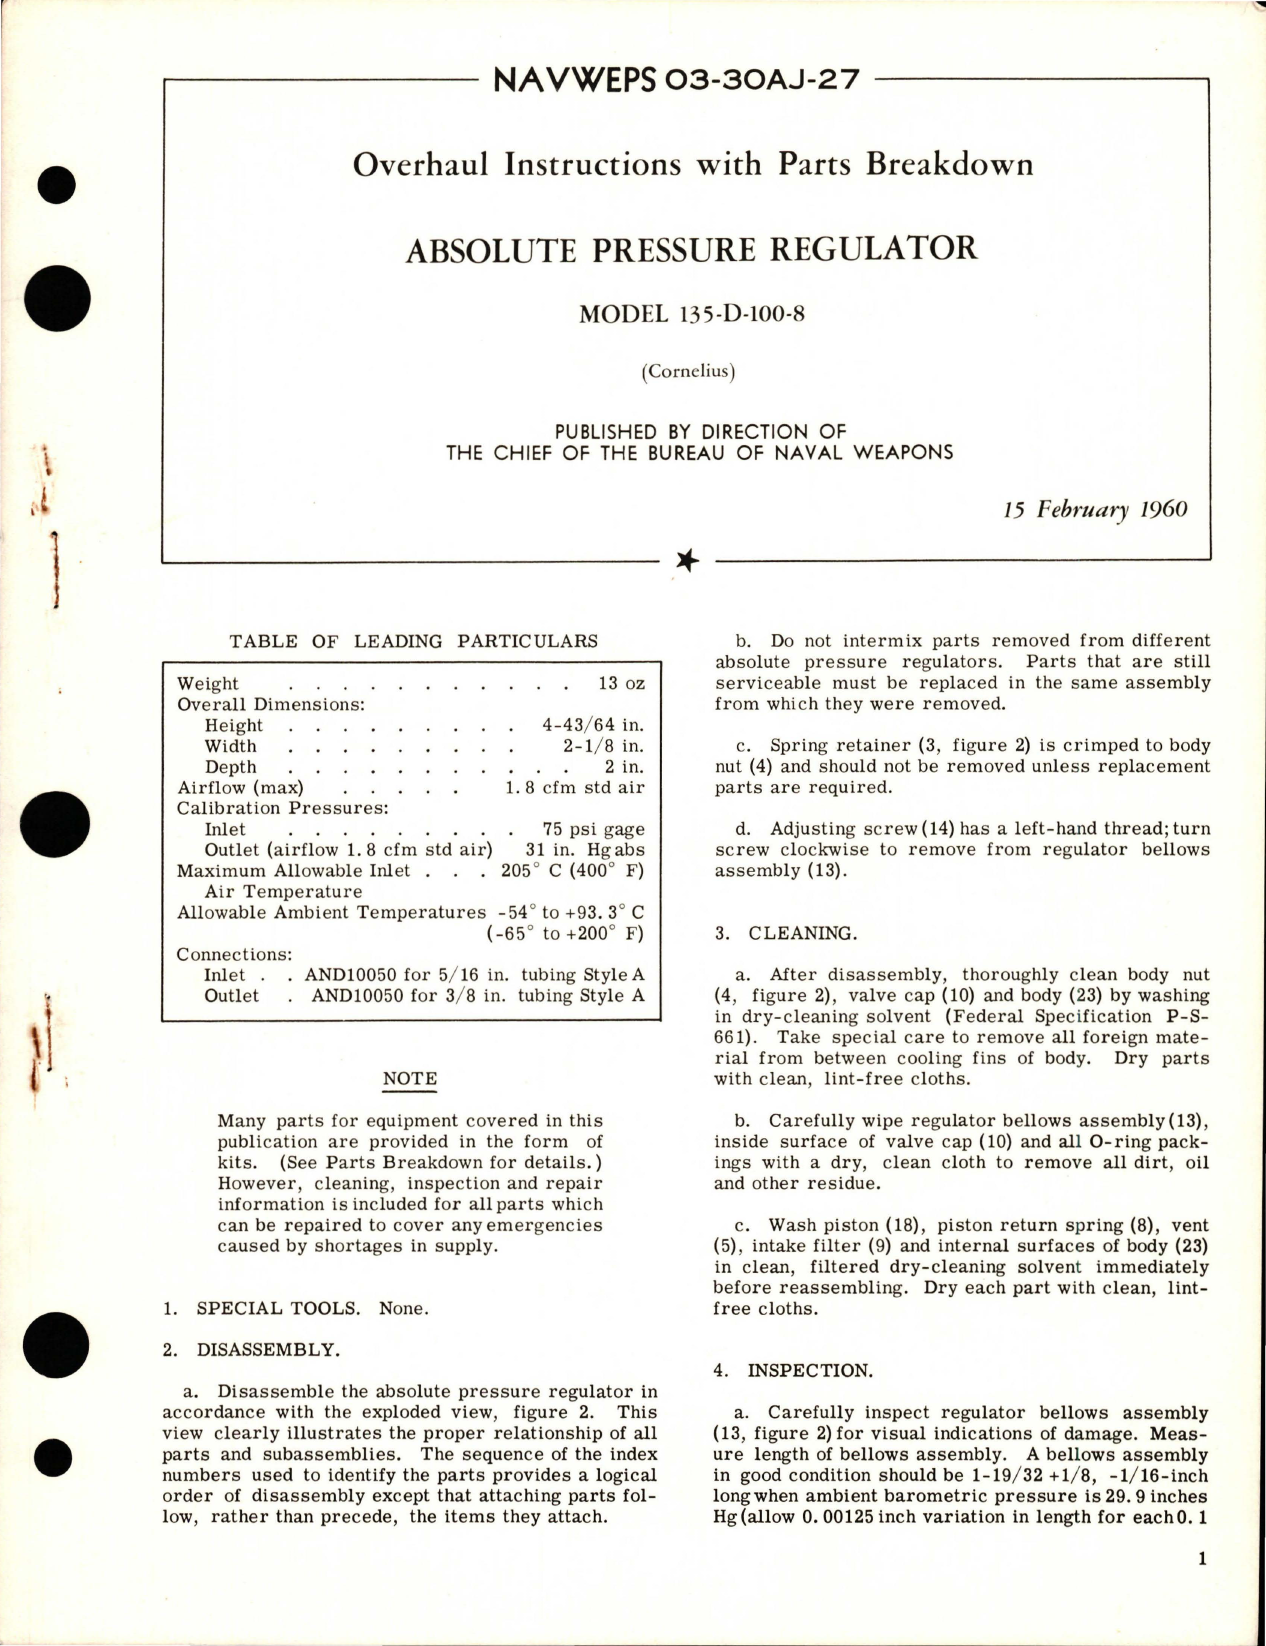 Sample page 1 from AirCorps Library document: Overhaul Instructions with Parts Breakdown for Absolute Pressure Regulator - Model 135-D-100-8